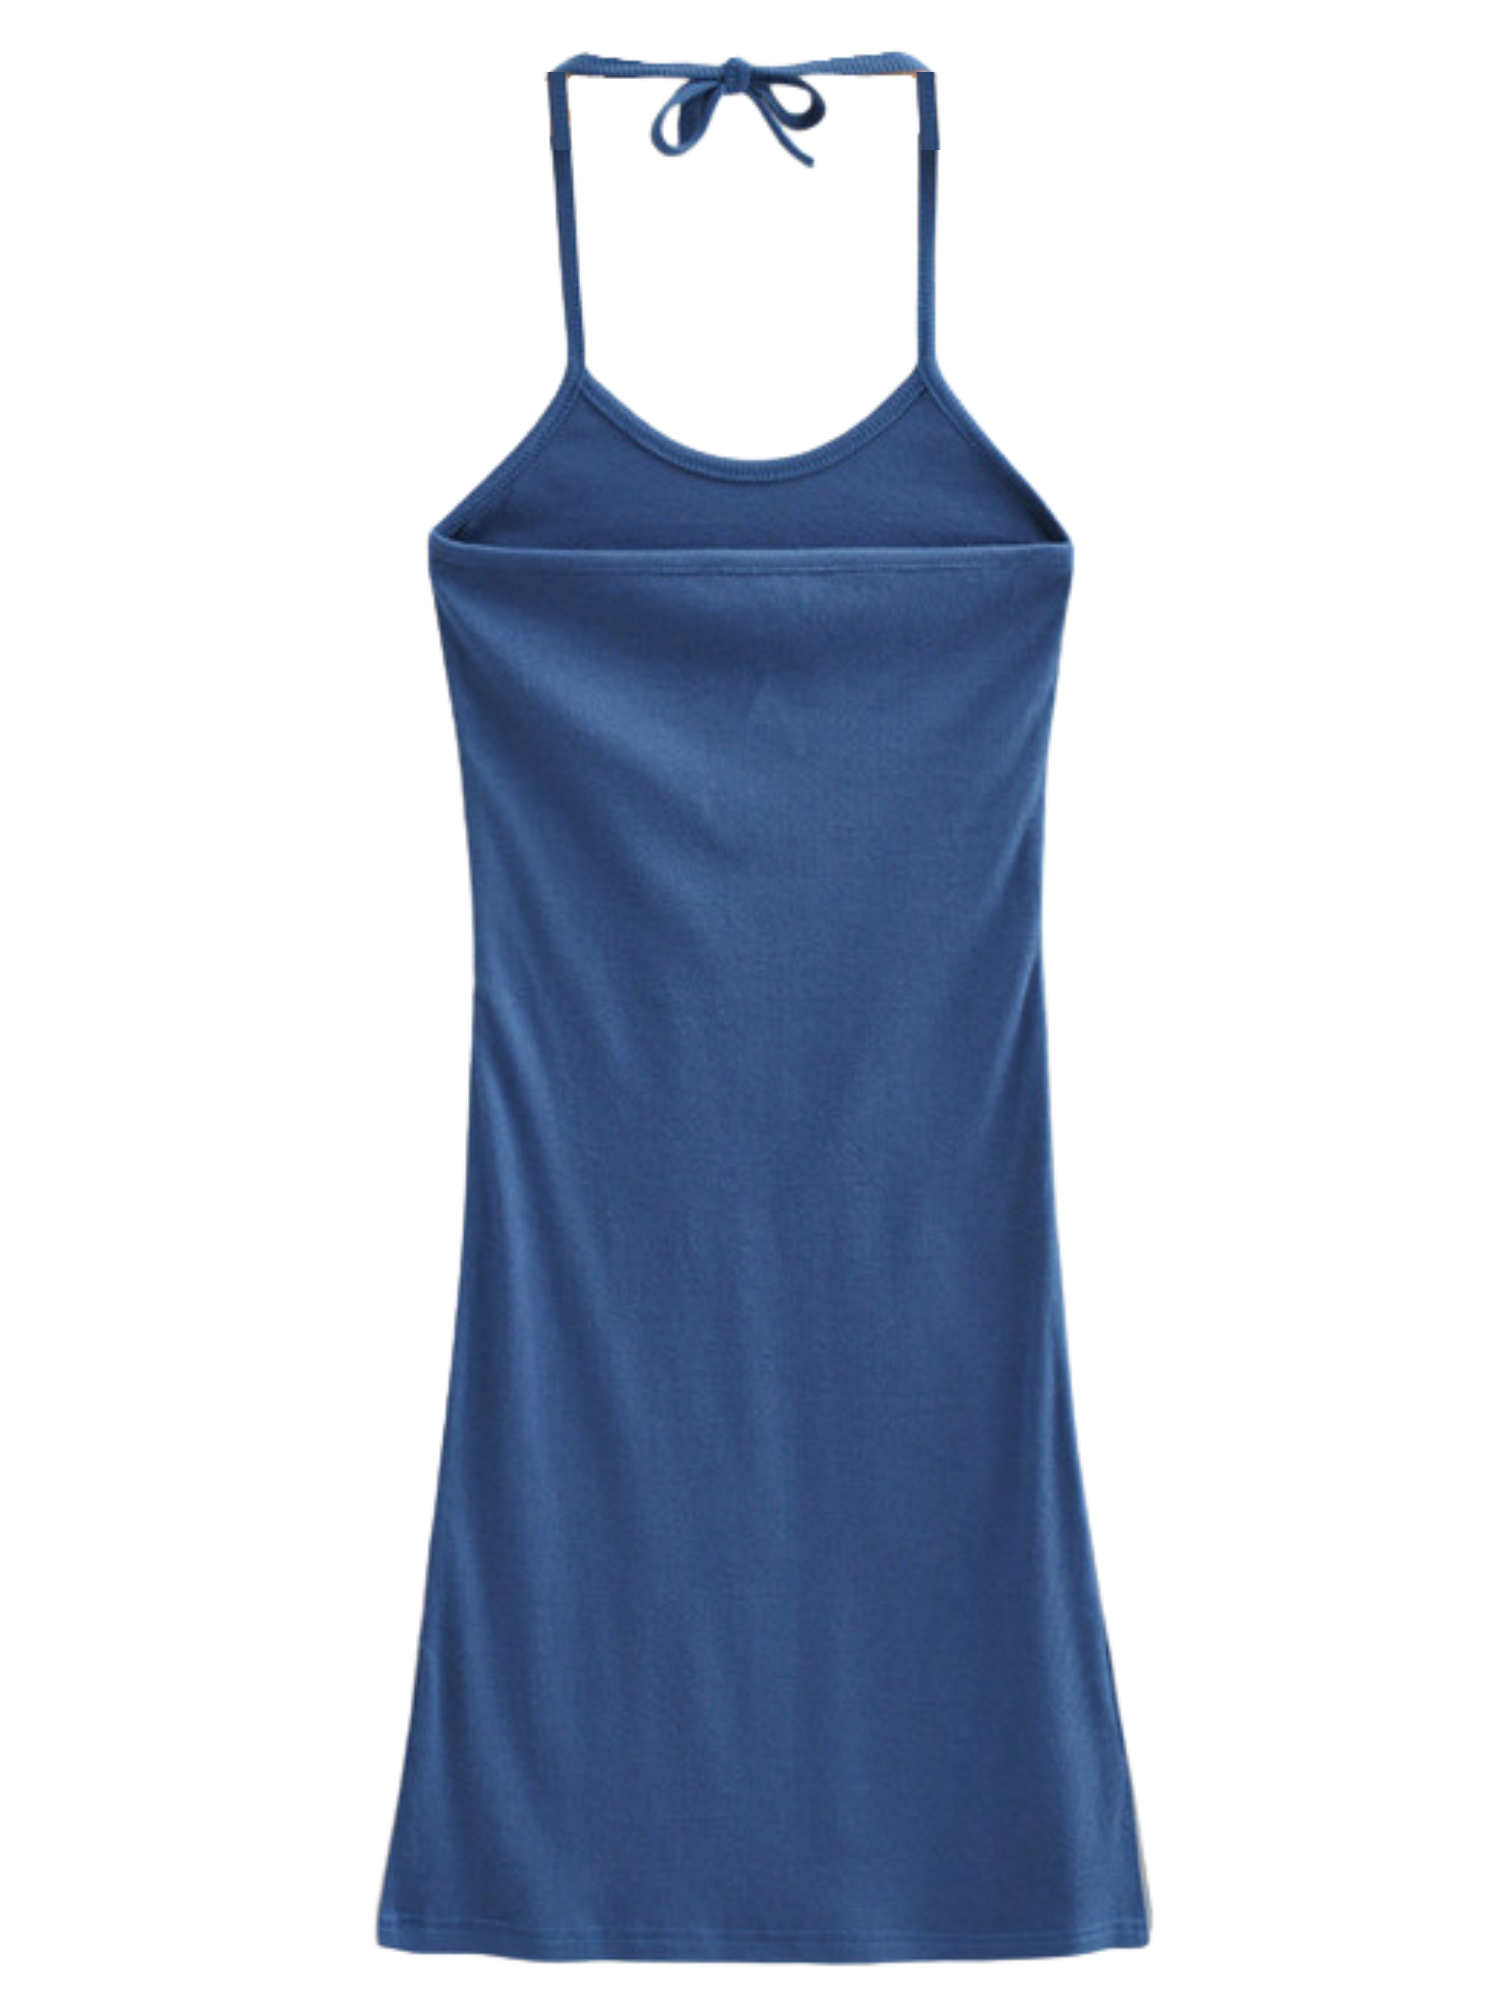 'Carly' Tied-neck Reflective Line Dress (3 Colors) – Goodnight Macaroon